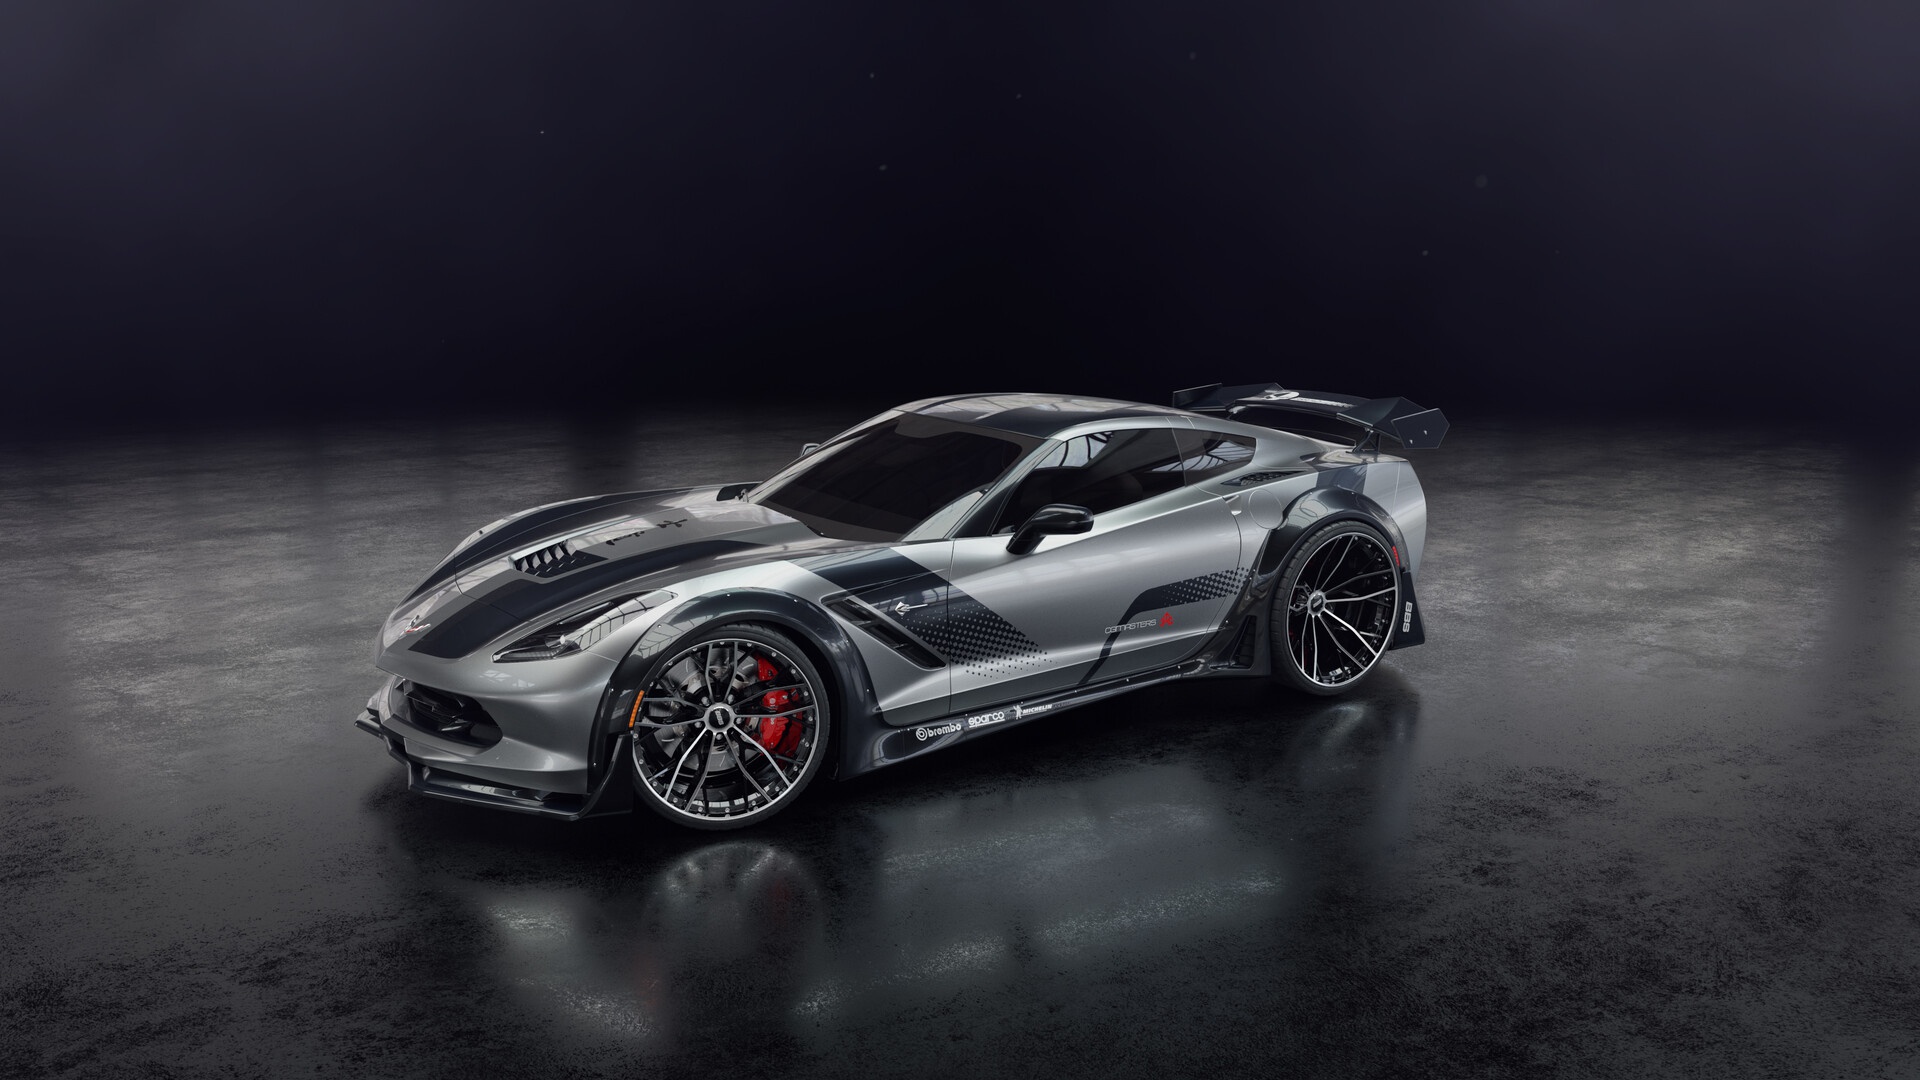 General 1920x1080 Chevrolet car silver cars vehicle Corvette Chevrolet Corvette C7 American cars bodykit